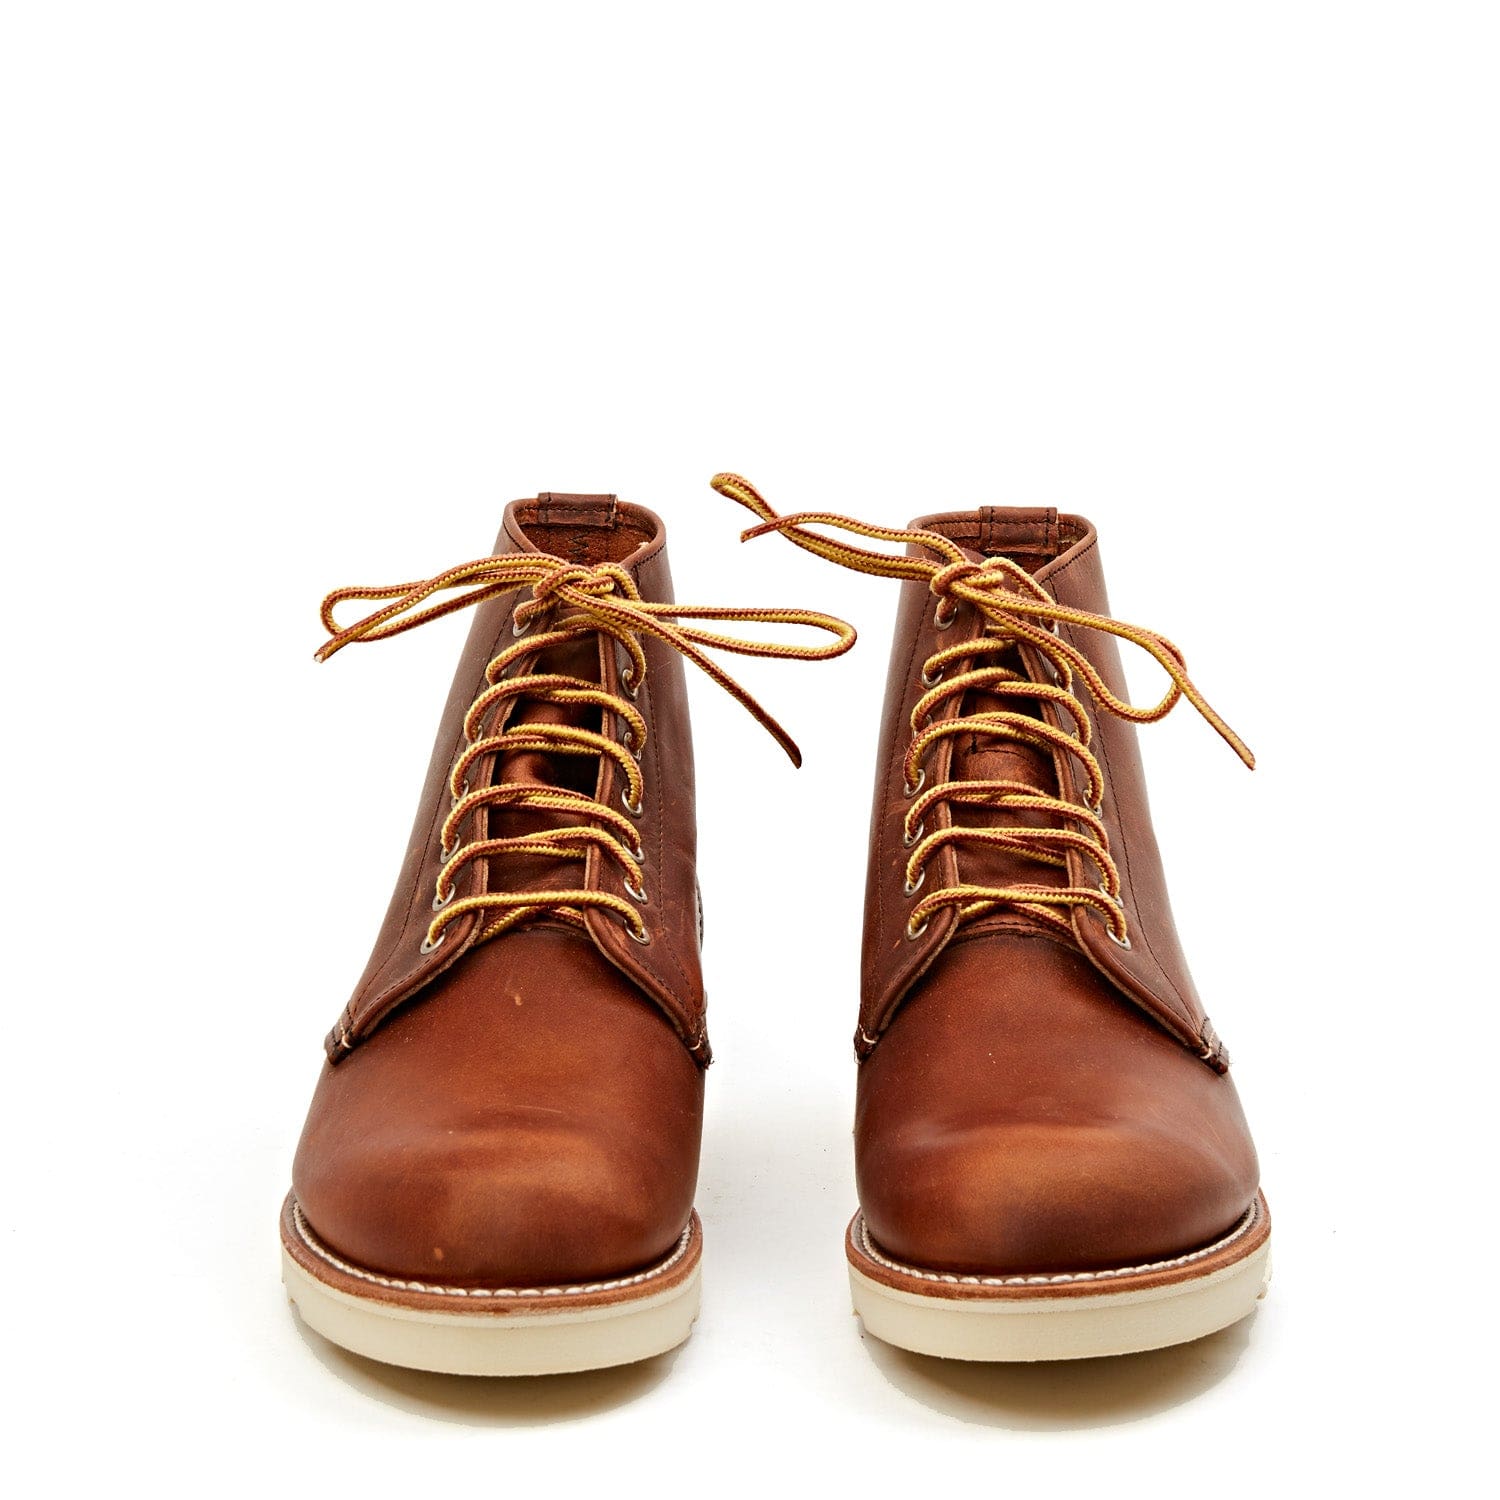 RED WING  8164 Classic Work 6" Round-toe